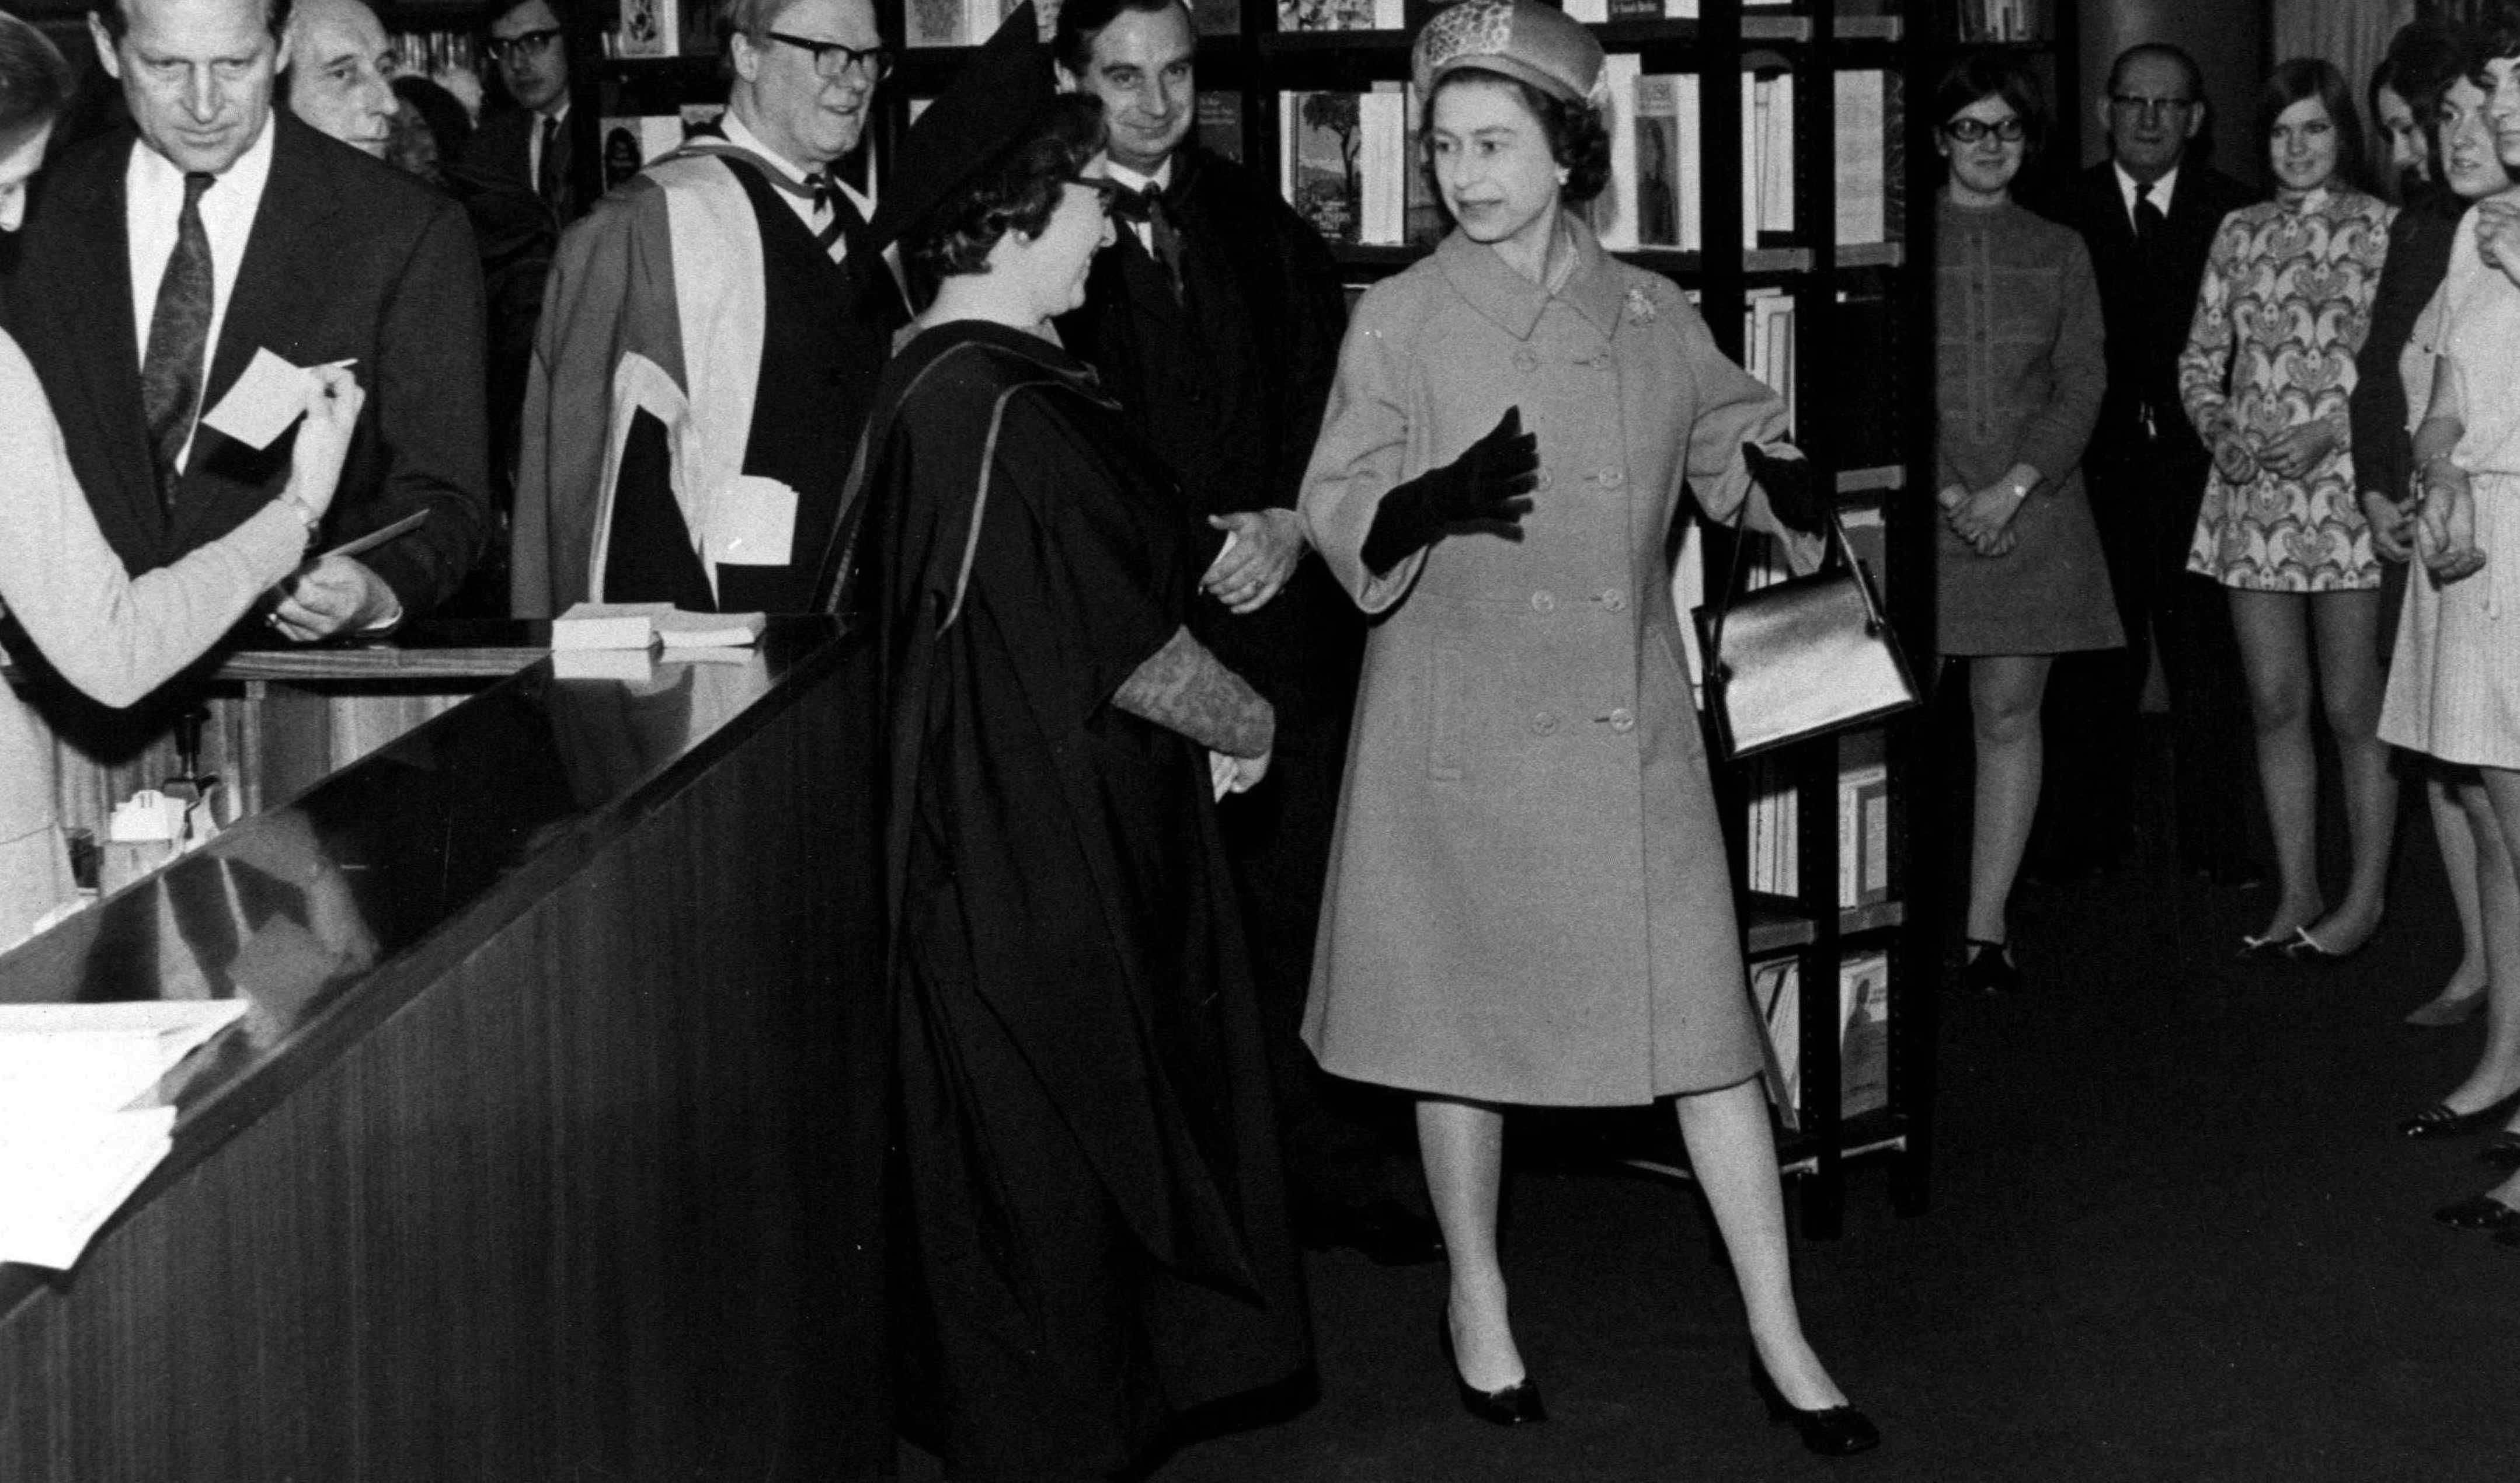 The Queen opens the Library